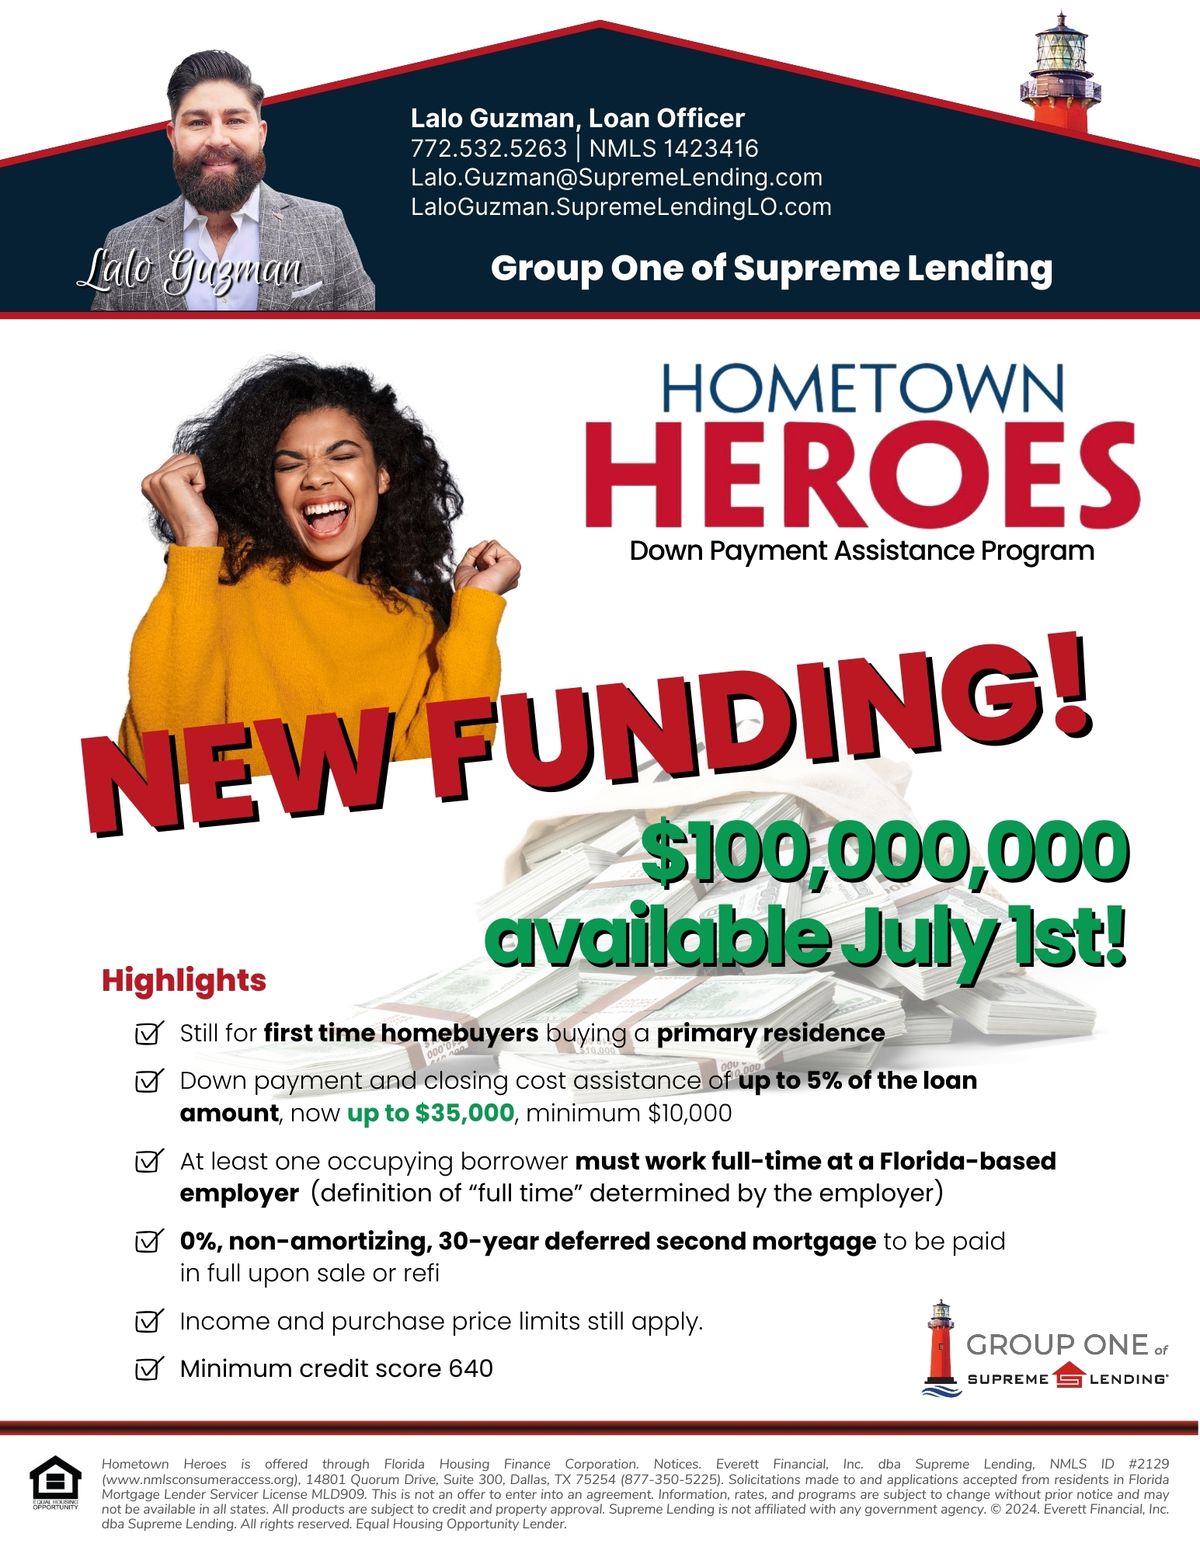 Florida Hometown Heroes Down Payment Assistance Program Funding